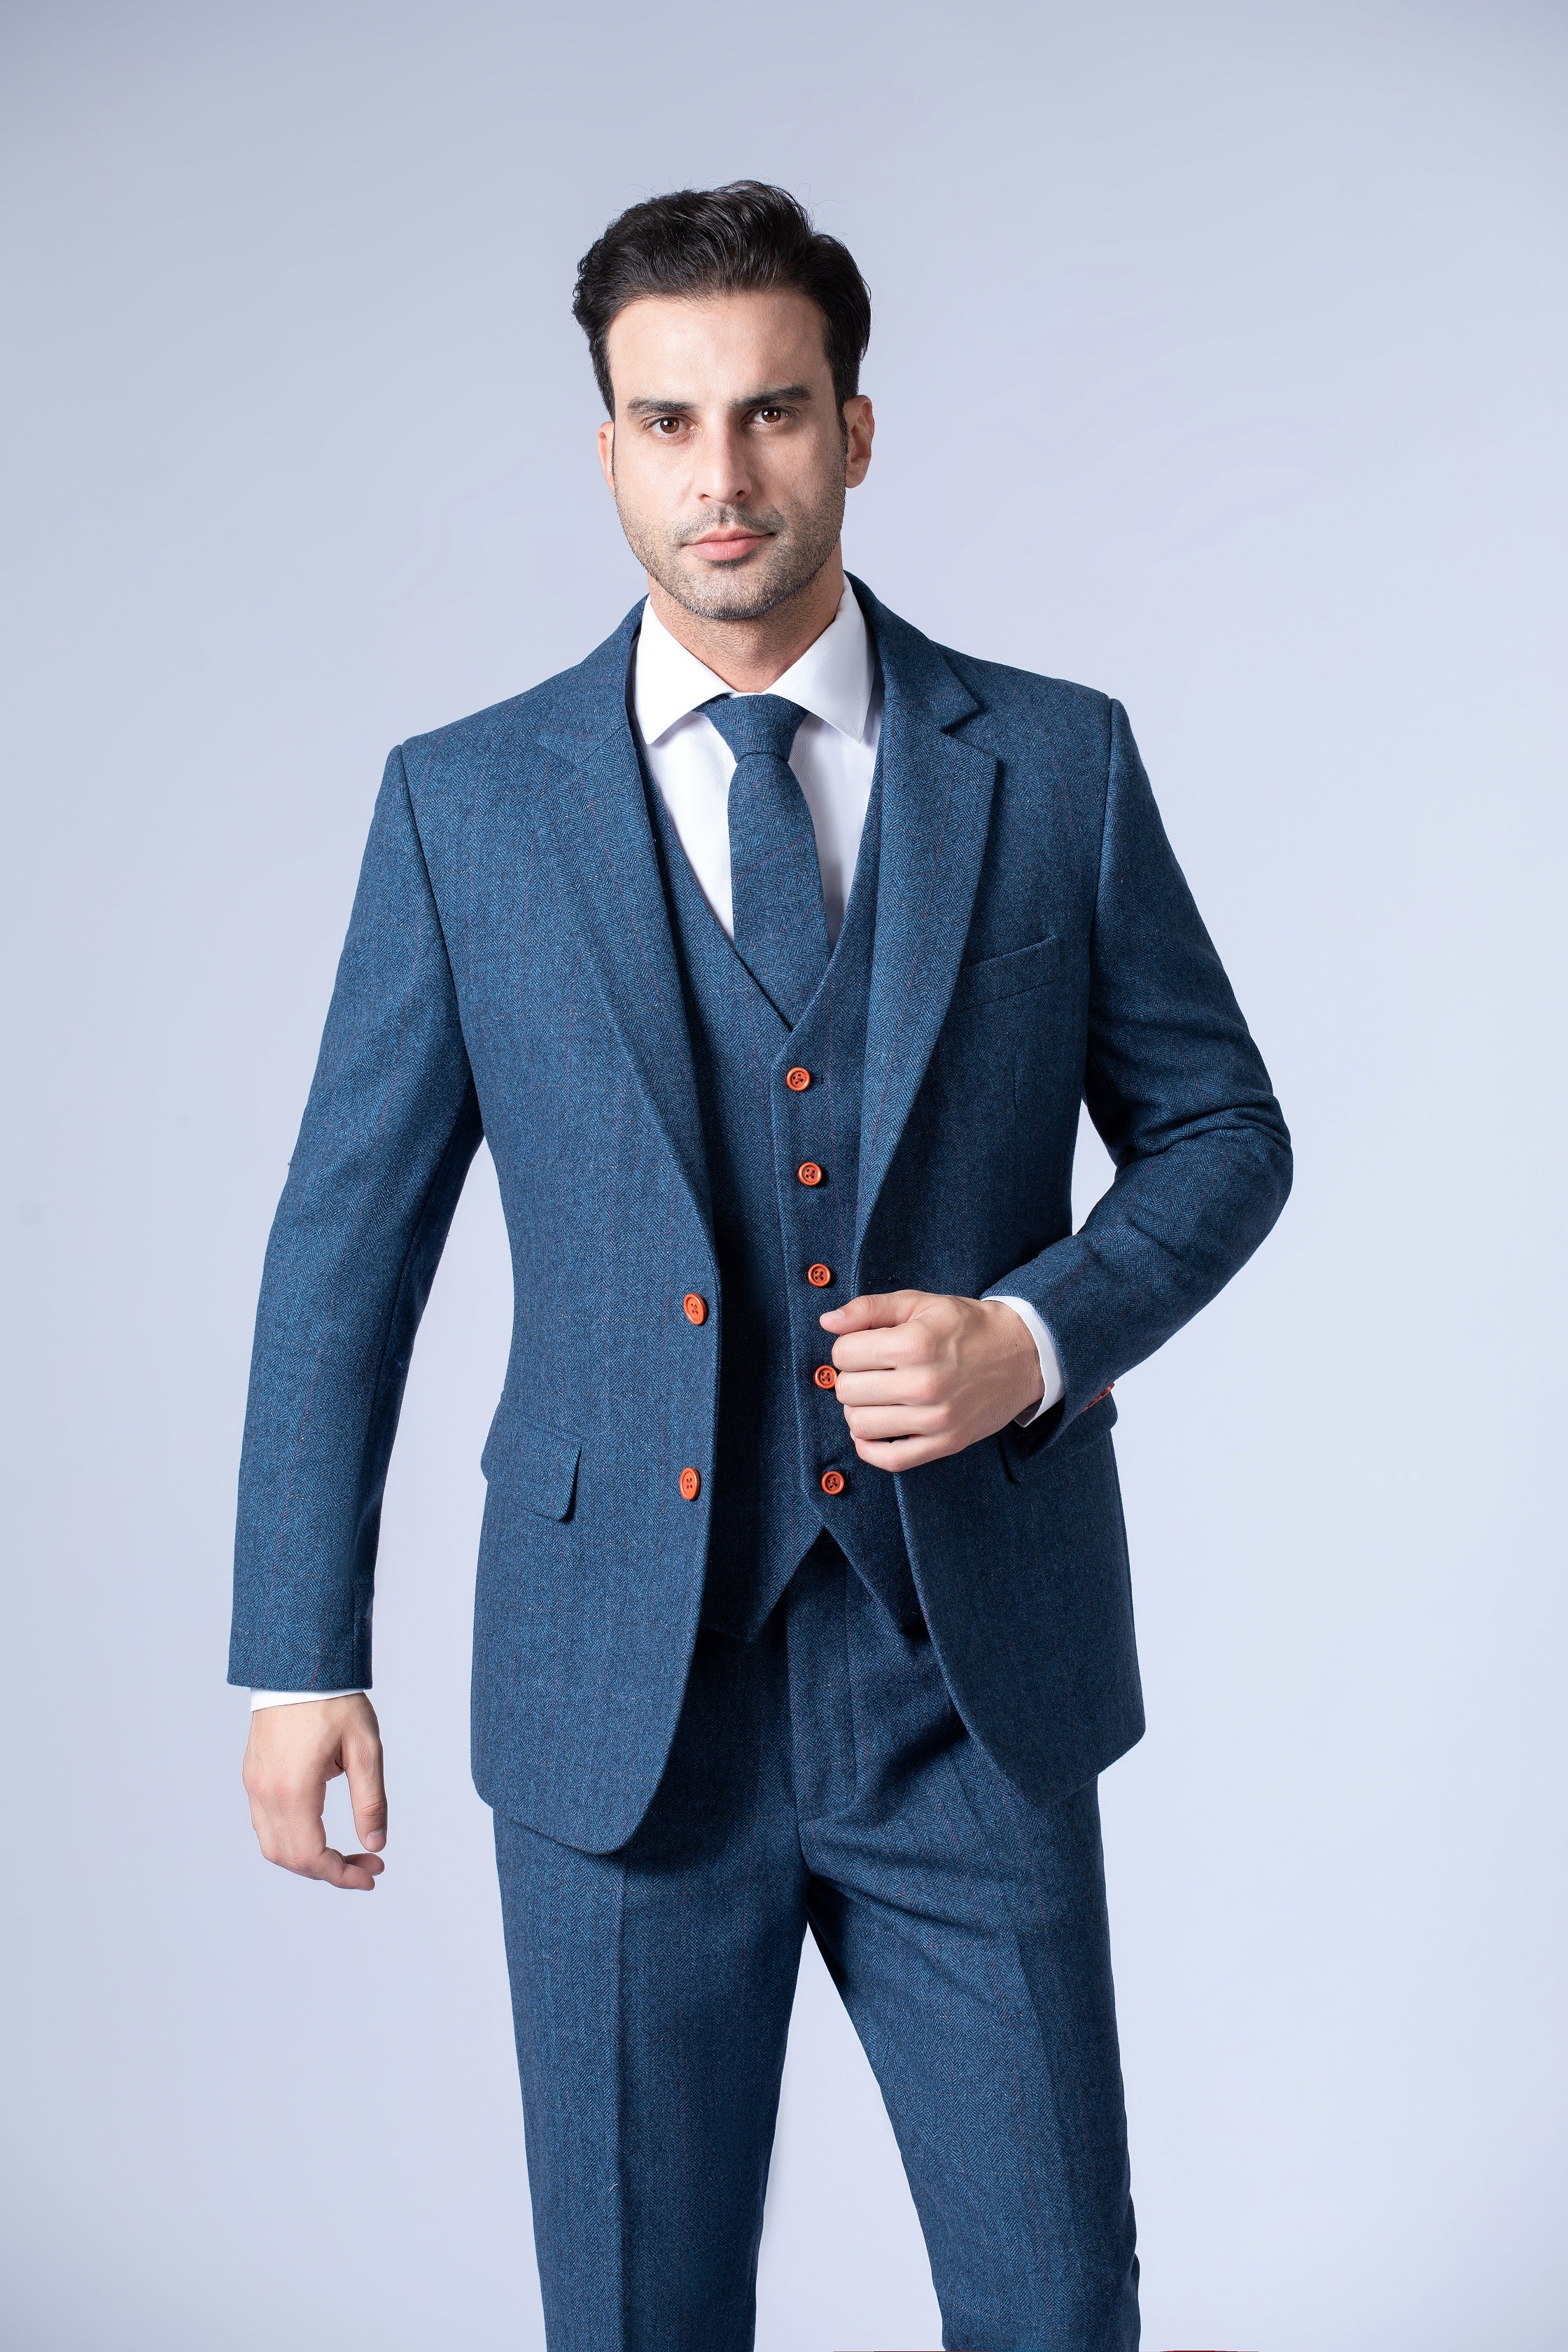 3 Piece and 2 Piece Suits - Wedding or Casual – Empire Outlet